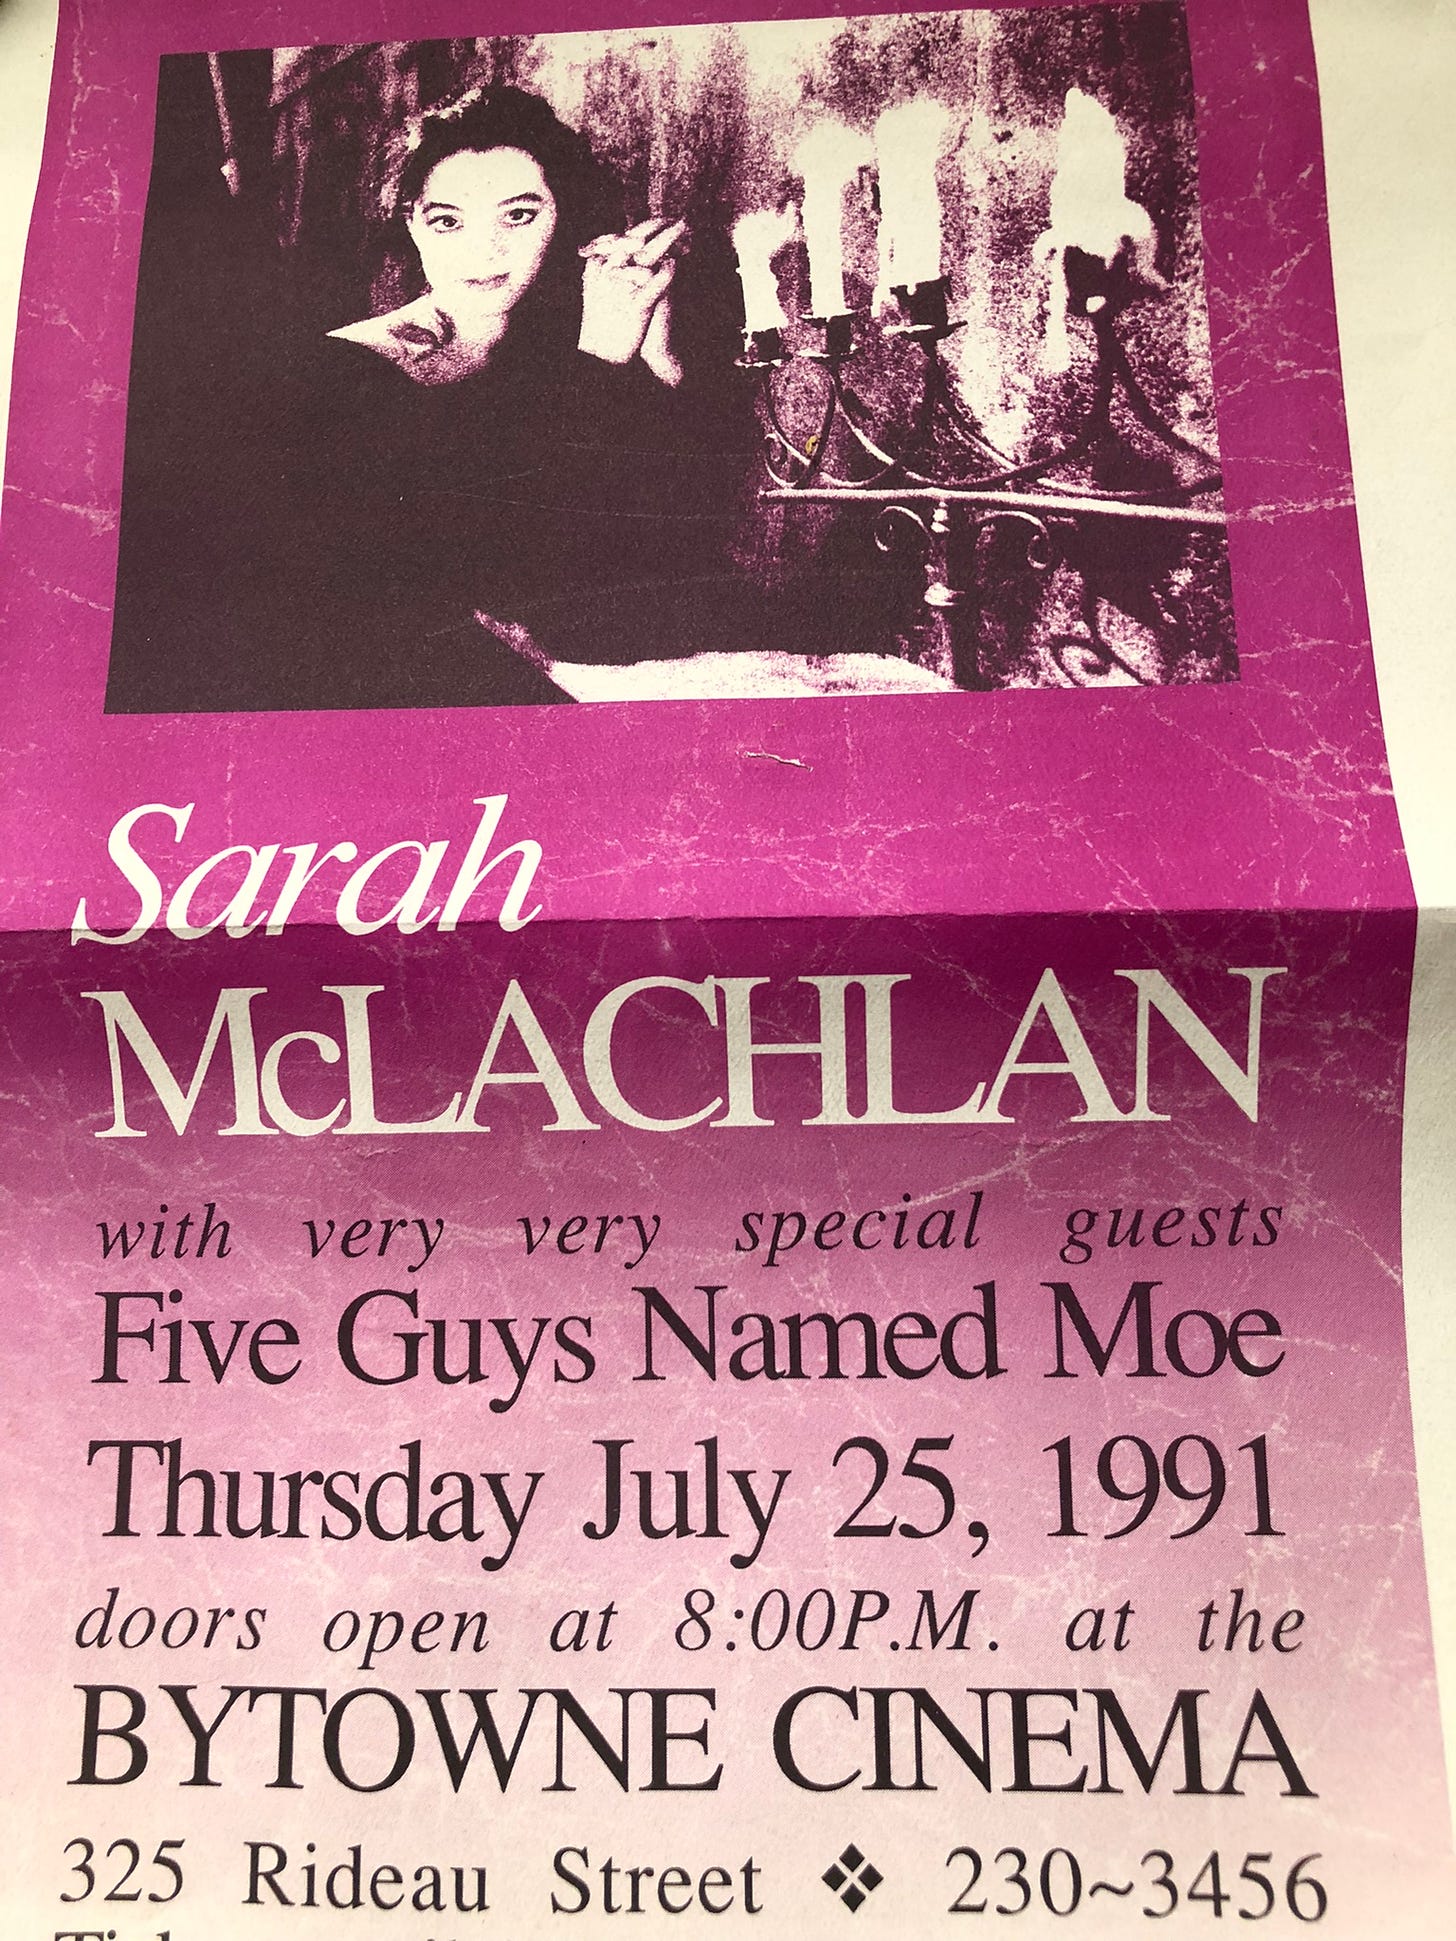 poster for Sarah McLachlan concert, July 25, 1991